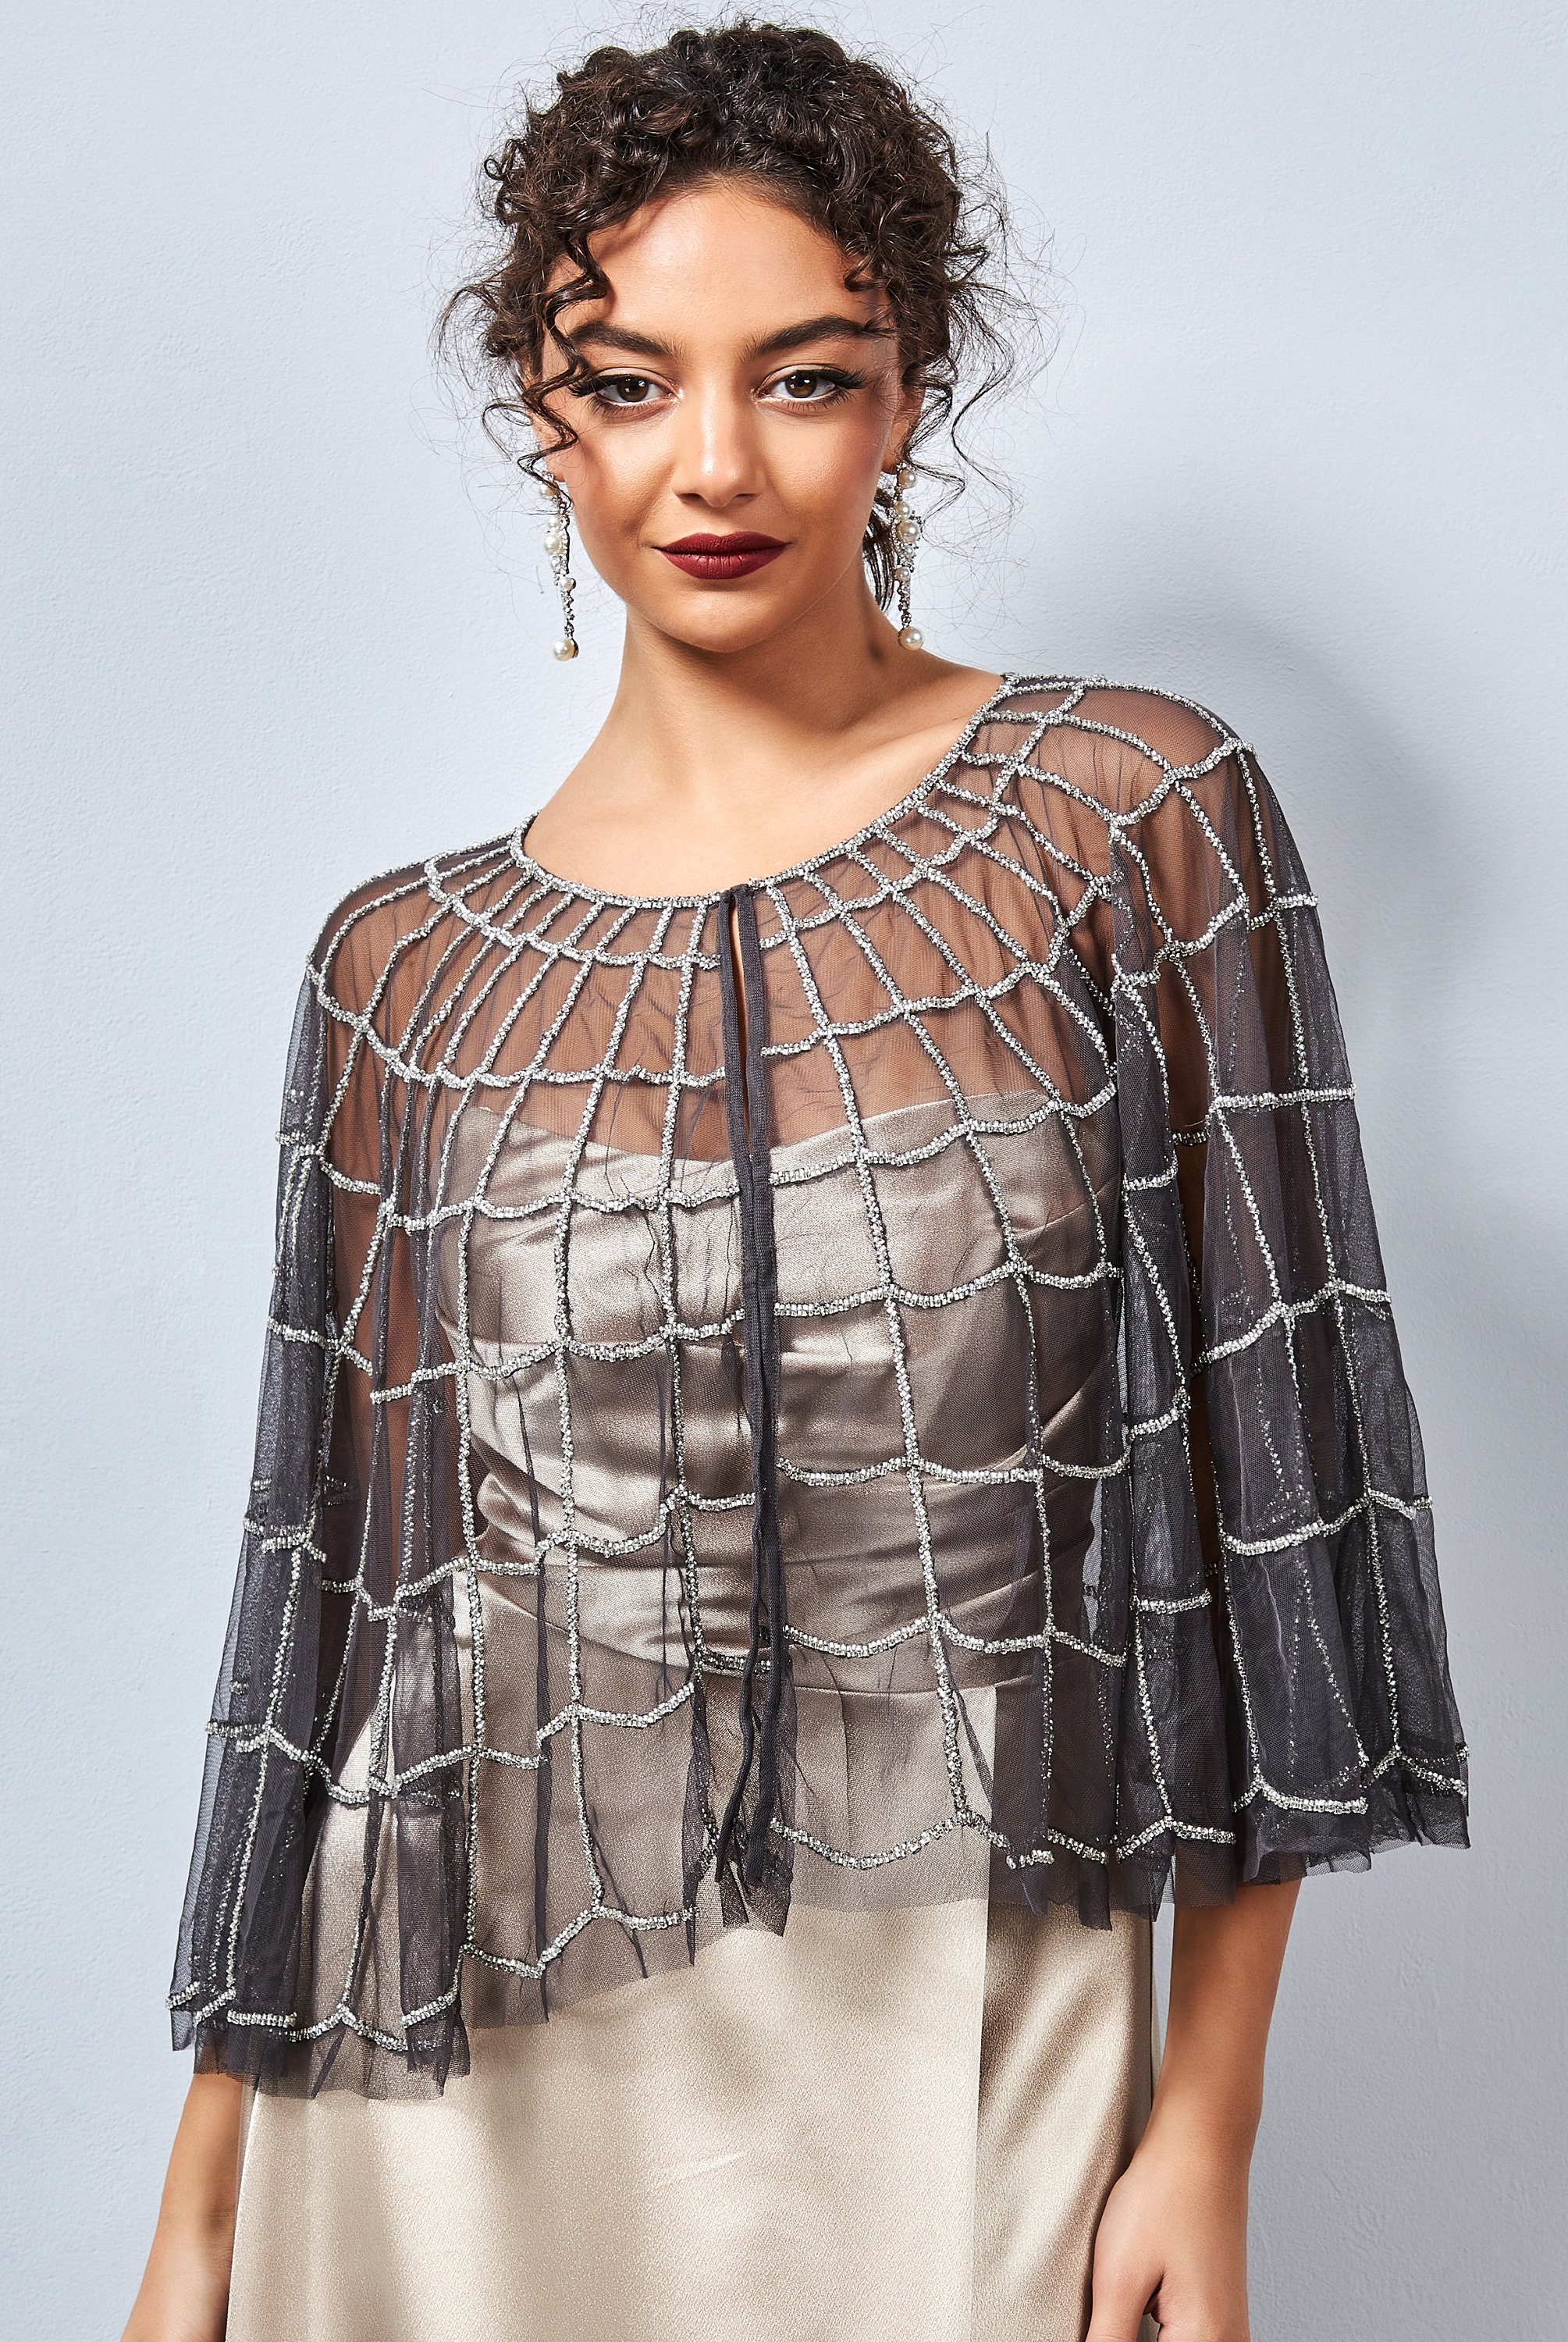 Black, Silver and Gold Fringe Deco Cape – Talulah Blue Costumes